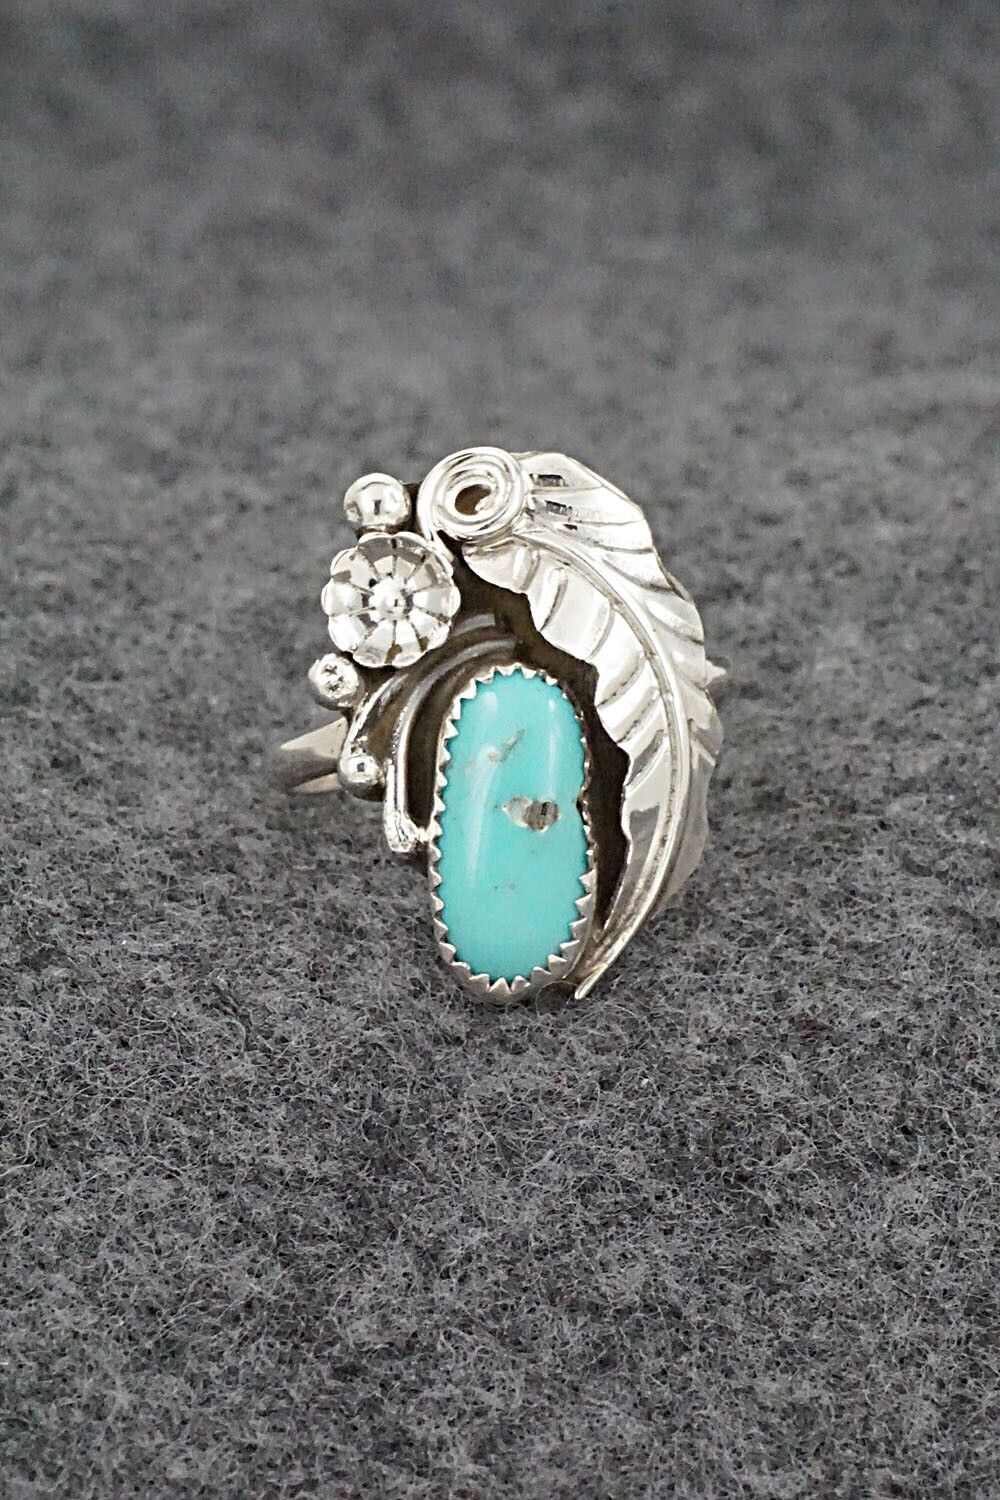 Turquoise & Sterling Silver Ring - Helena Martinez - Size 7.75